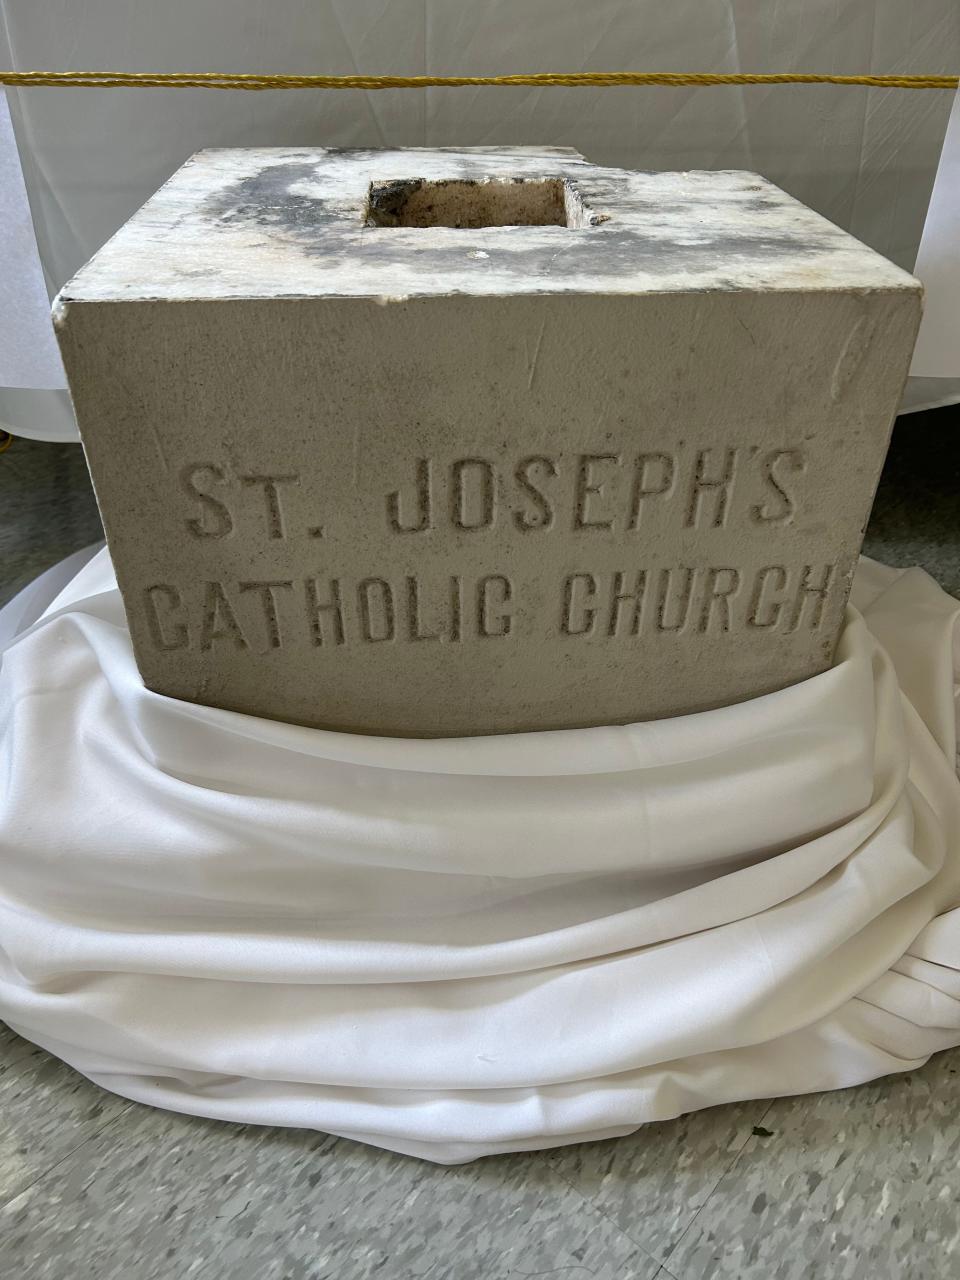 A nickel from 1912 was found inside of St. Joseph’s cornerstone, both of which are on display in a retrospective gallery at the church on Epps Bridge Parkway.